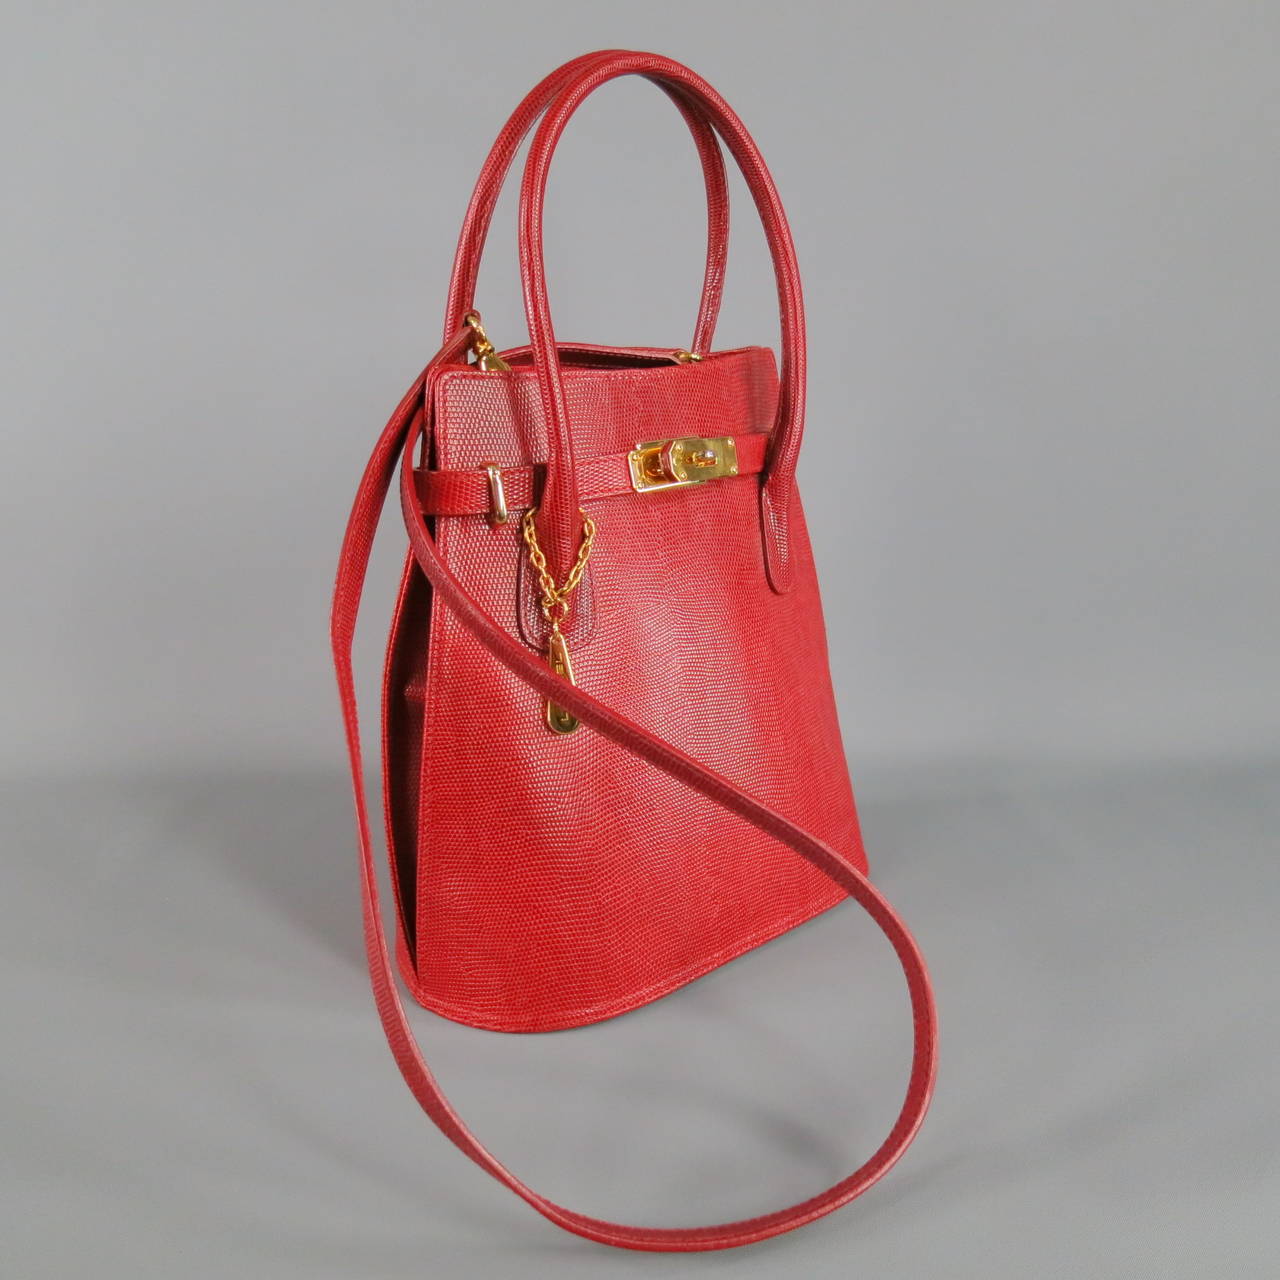 Gorgeous vintage LANCEL bag with detachable thin strap cross body option.  Standing top handles.  Flat bottom and pear shaped; lizard embossed sturdy red leather.  Shiny gold metal hardware.  Lancel fabric interior with zipper pocket.  Made in